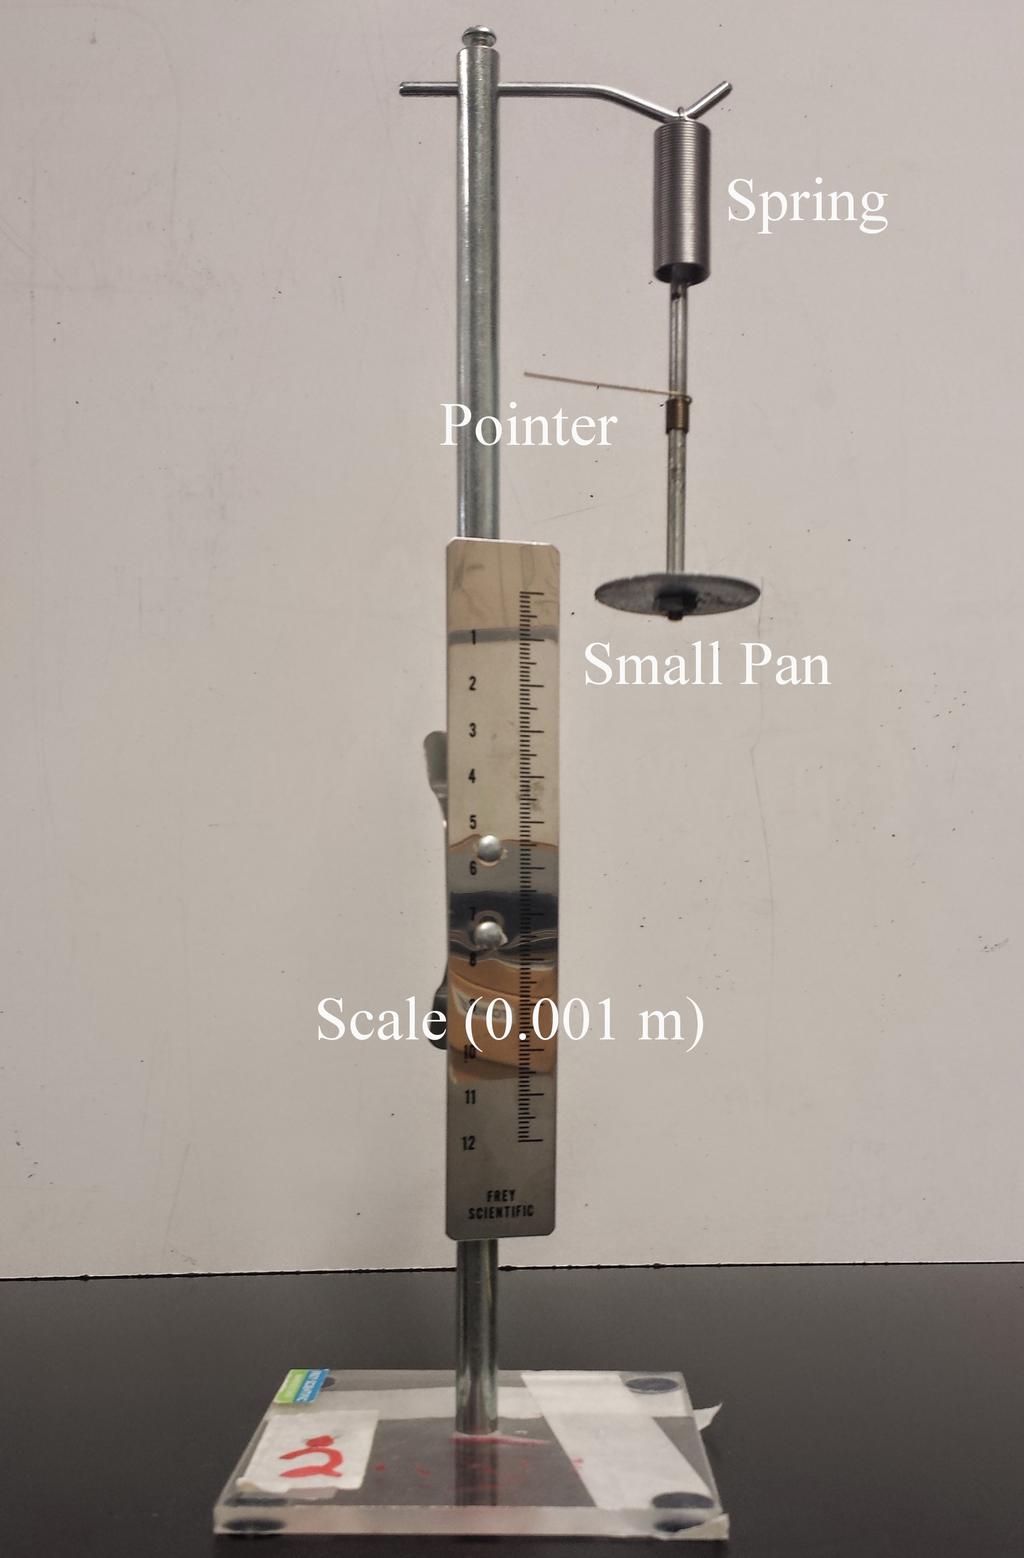 2.4 Apparatus Apparatus 1: The scale was positioned so as to have the pointer, which is located between the small pan and the spring, pointing at 0.00 m.